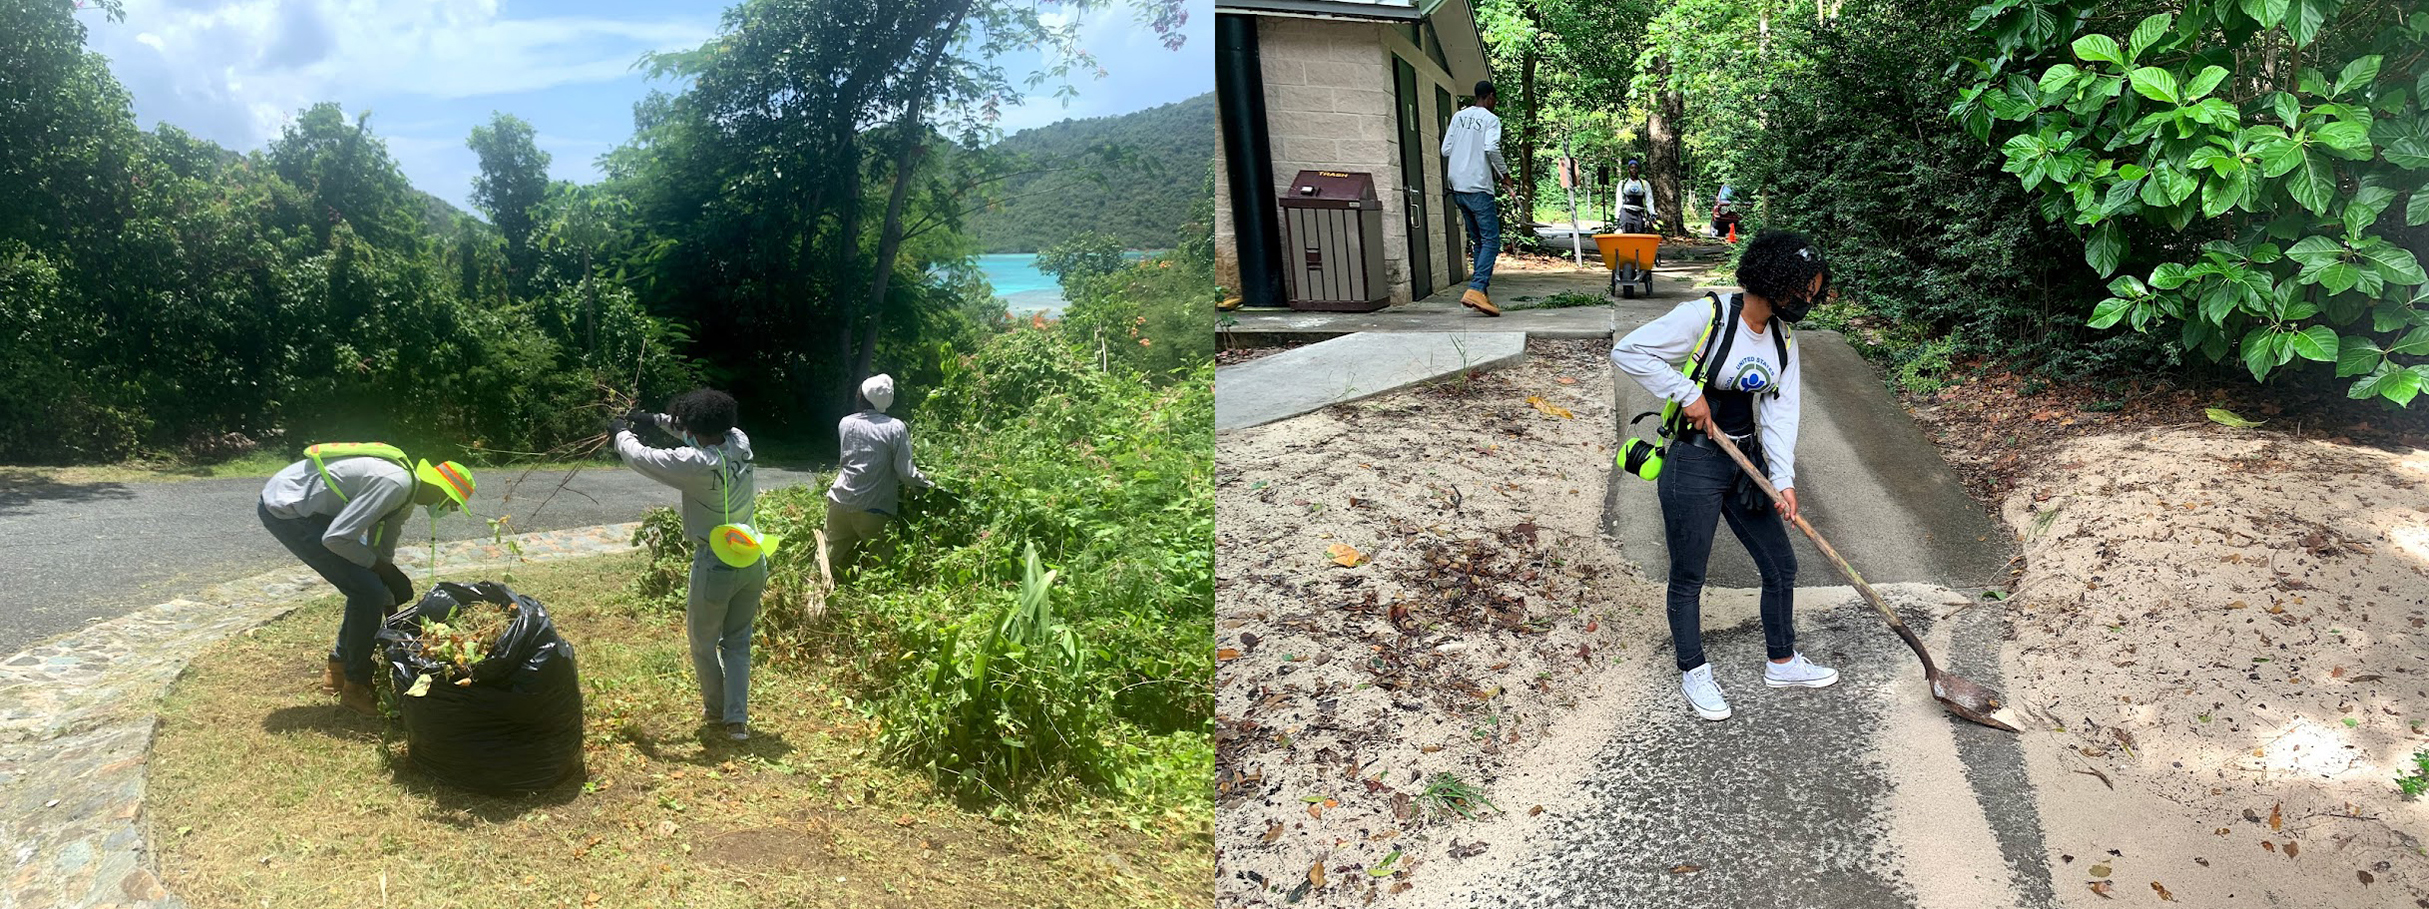 Dressed in grey long sleeve shirts and high visibility personal protective equipment, YCC crew members work to clear trails, roadways, and sidewalks at Virgin Islands National Park.